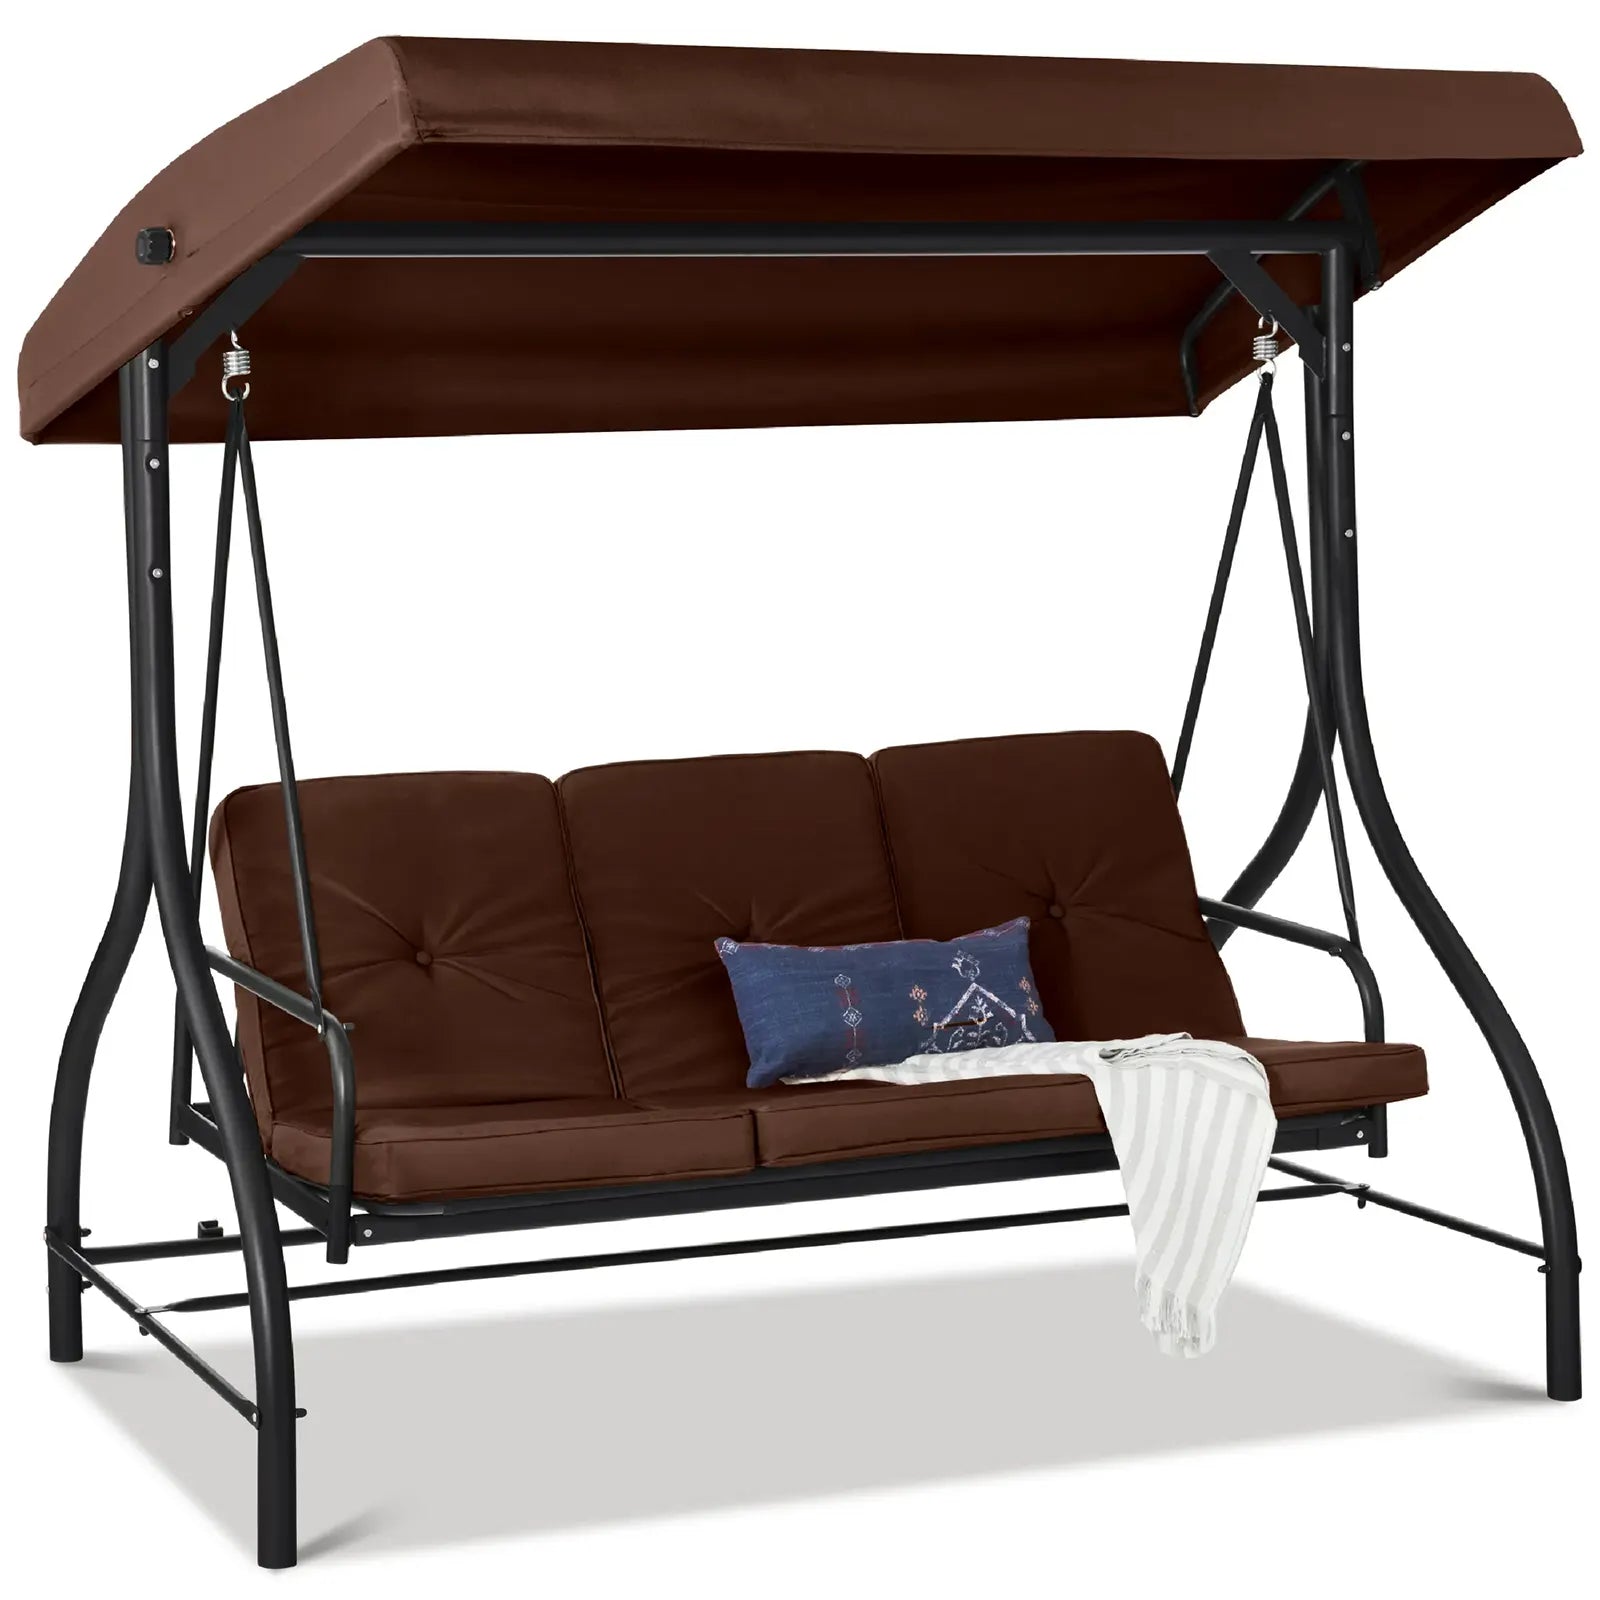 Outdoor Converting Canopy 3-Seat Swing Glider Patio Hammock w/ Removable Cushions